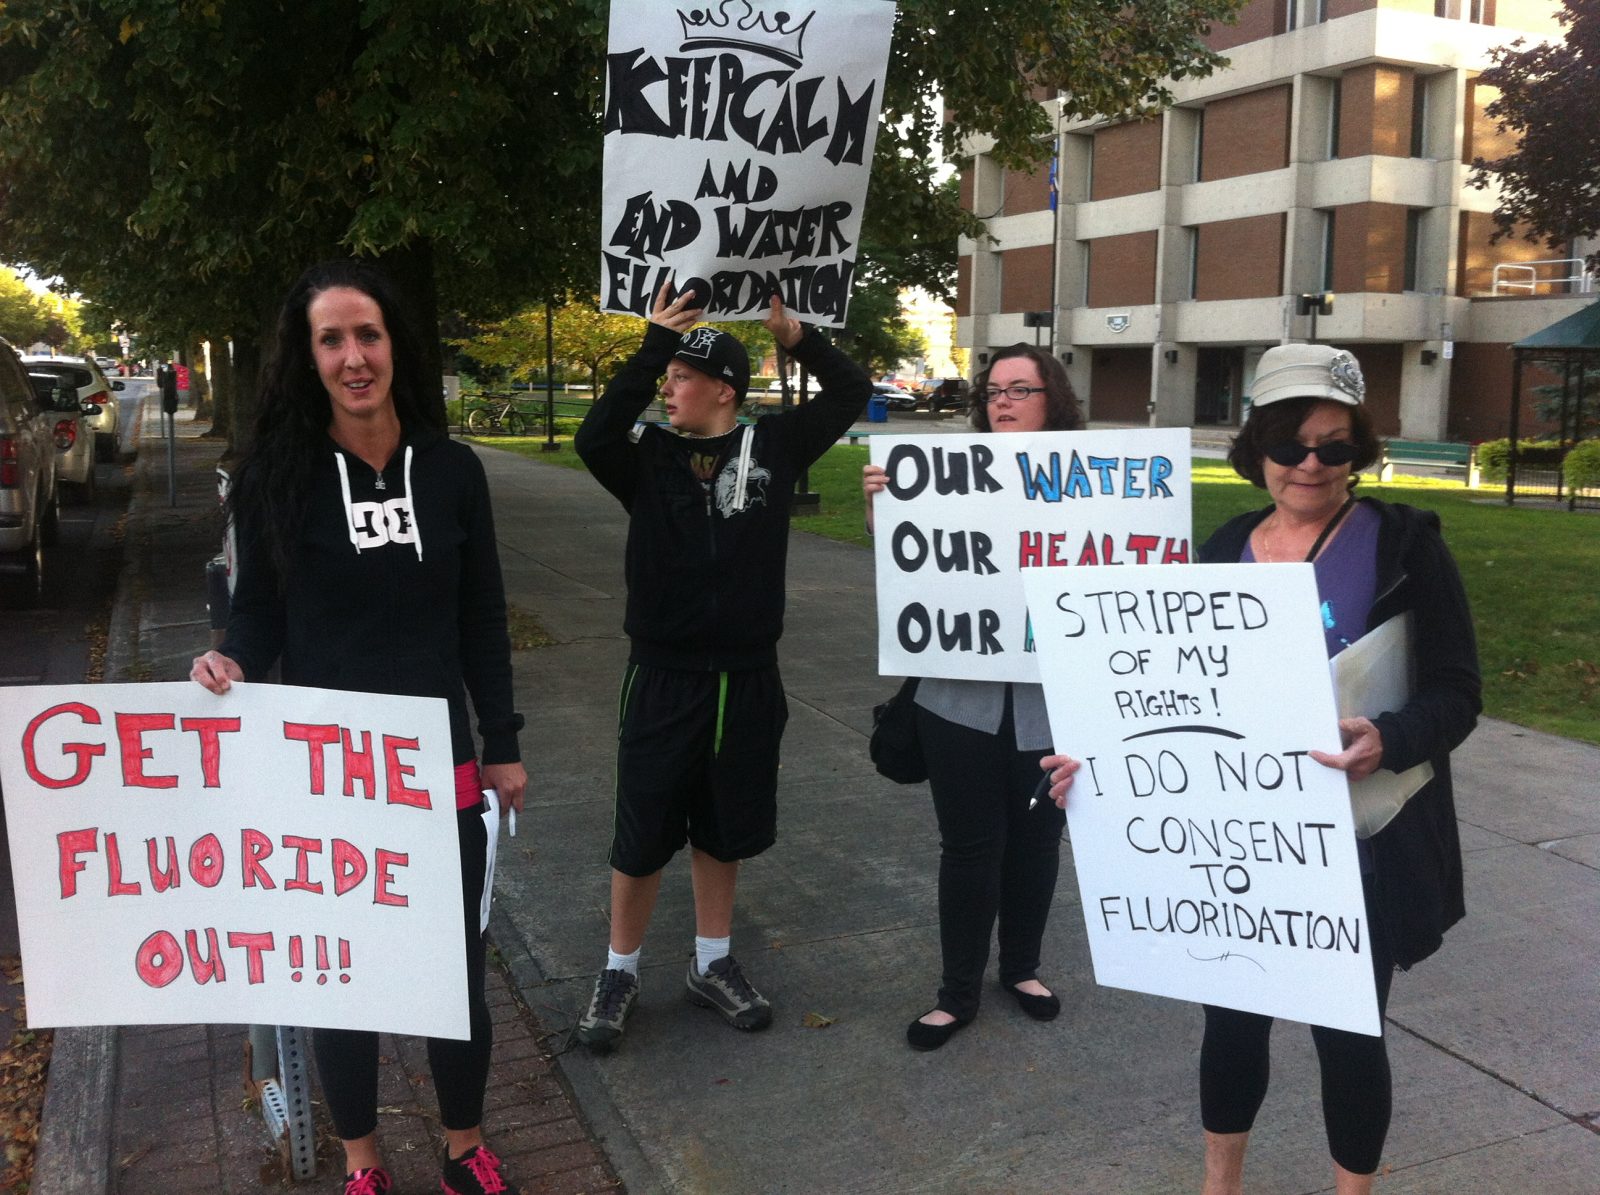 Fluoride costs keep going up at treatment plant: report